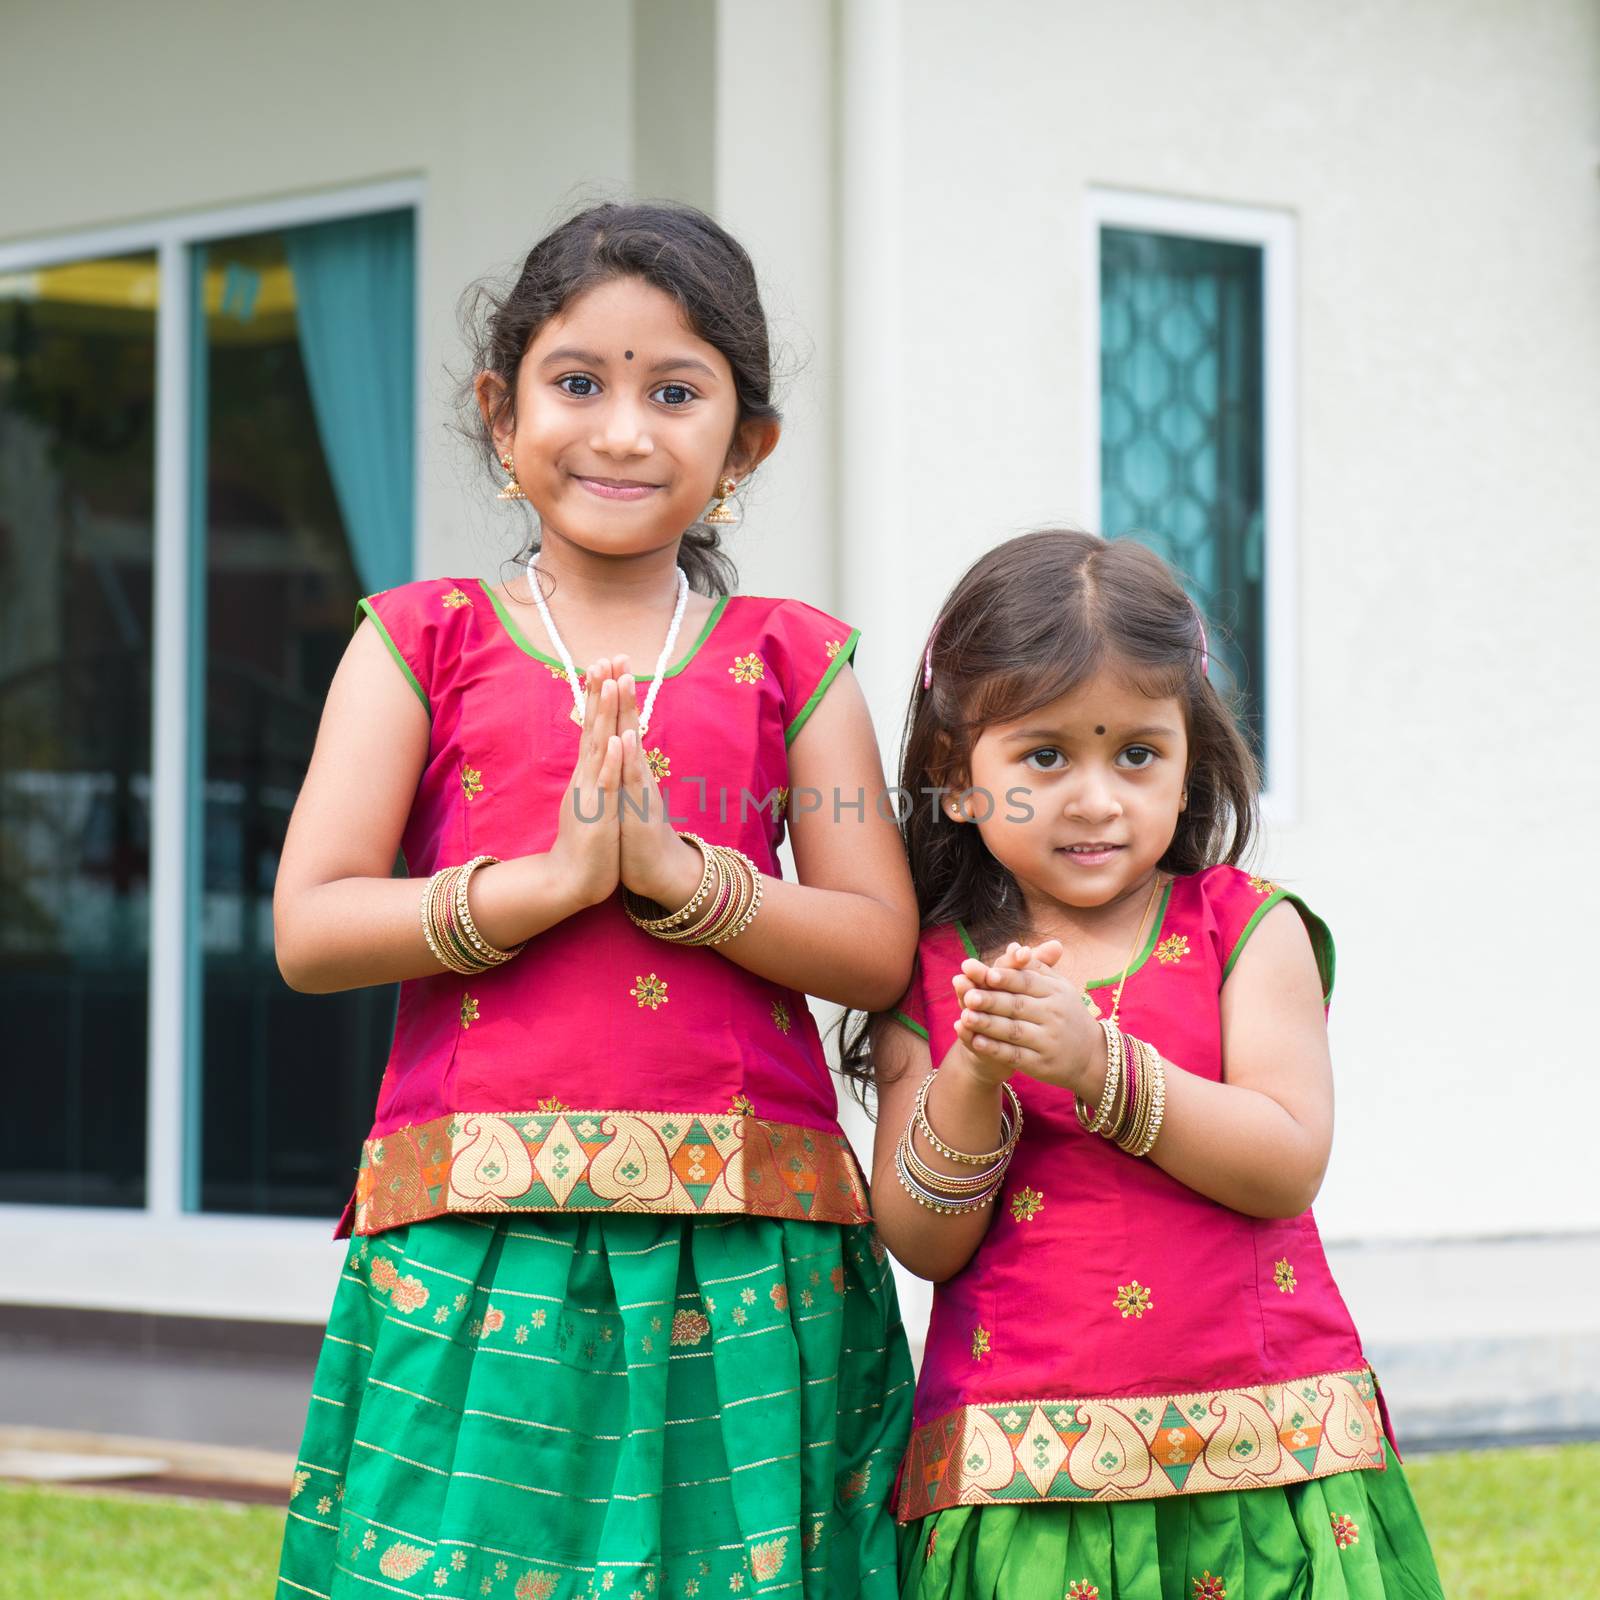 Cute Indian girls dressed in sari with folded hands representing traditional Indian greeting, standing outside their new house celebrating diwali, festival of lights.